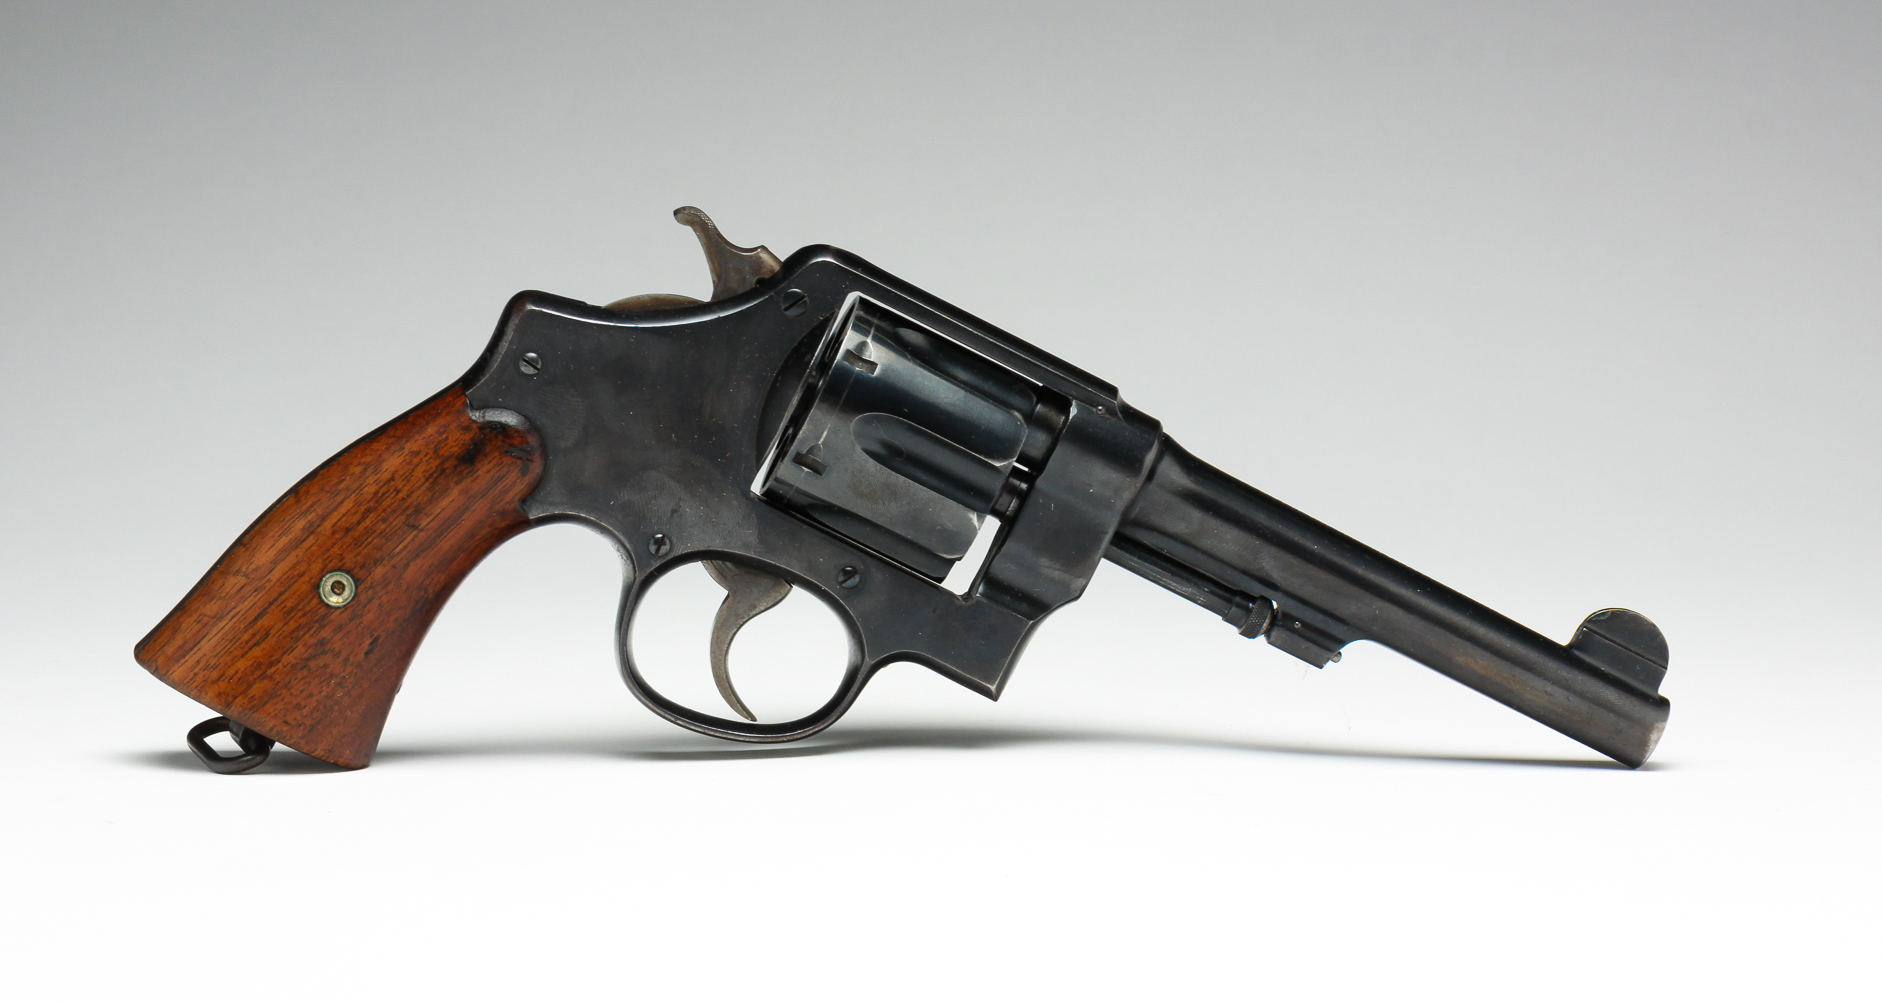 SMITH & WESSON US ARMY MODEL 1917